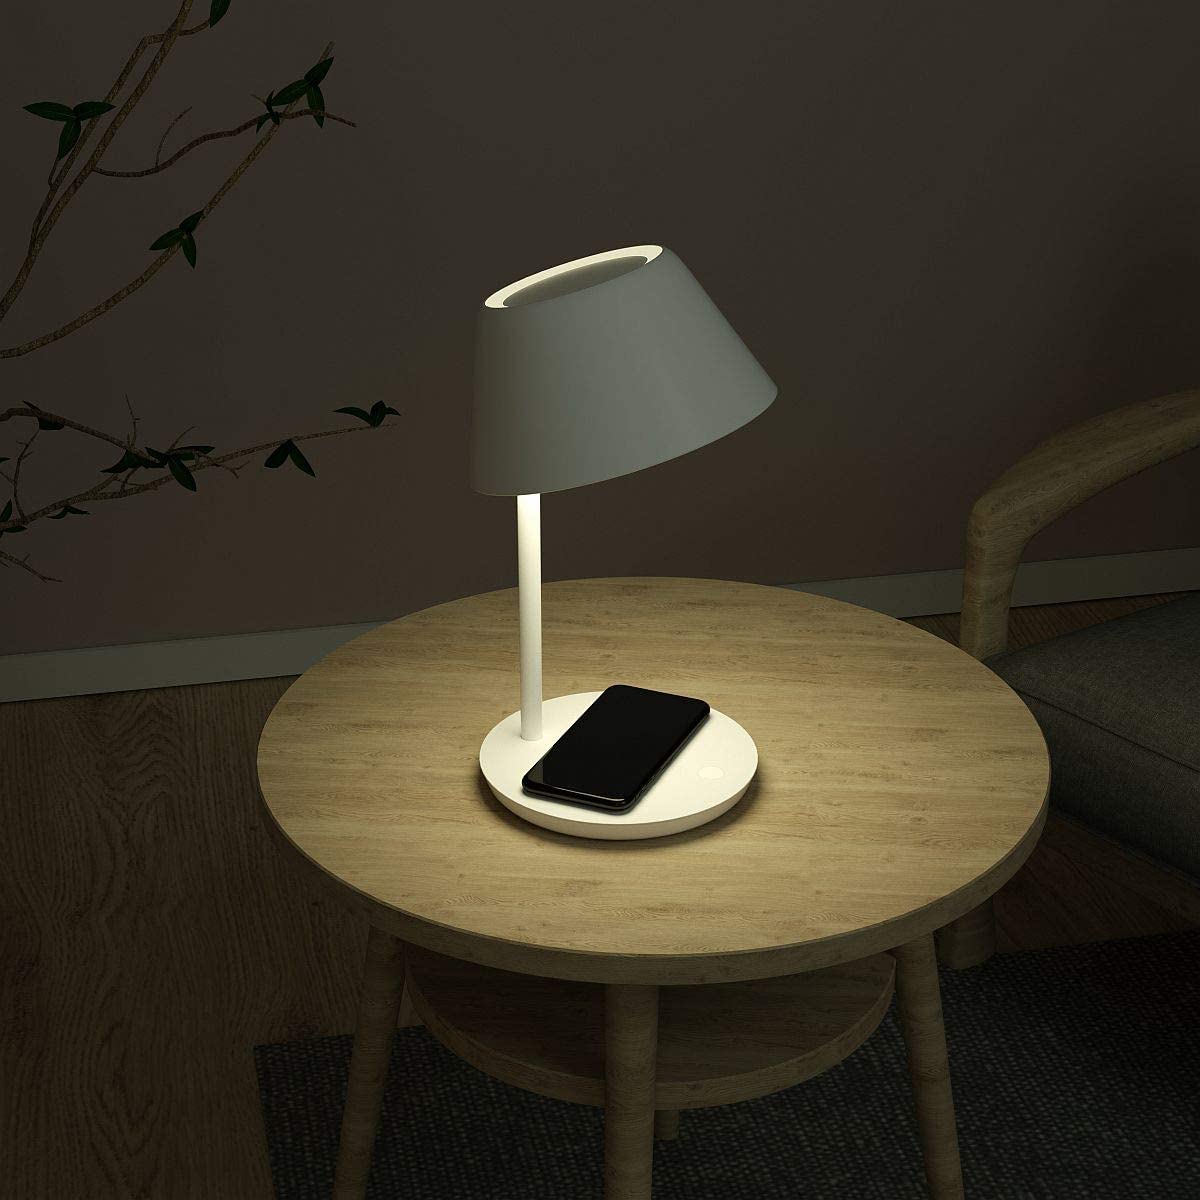 Yeelight Staria Bedside Lamp Pro With wireless charging base